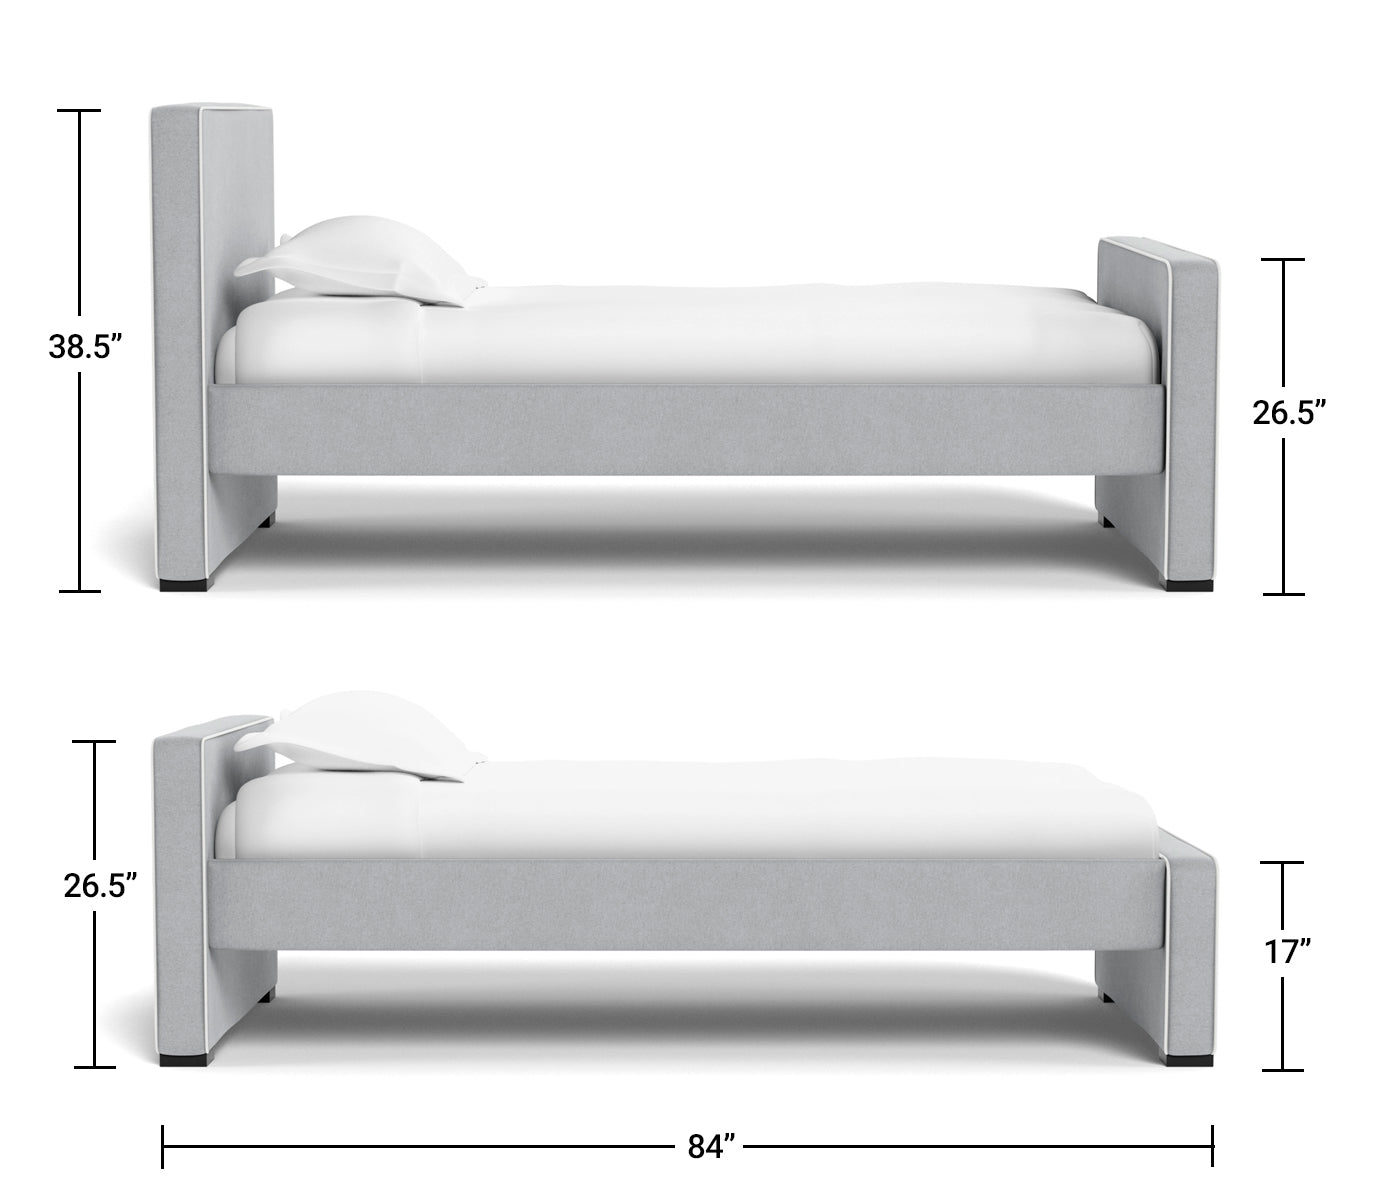 Dorma Bed Dimensions Full Bed